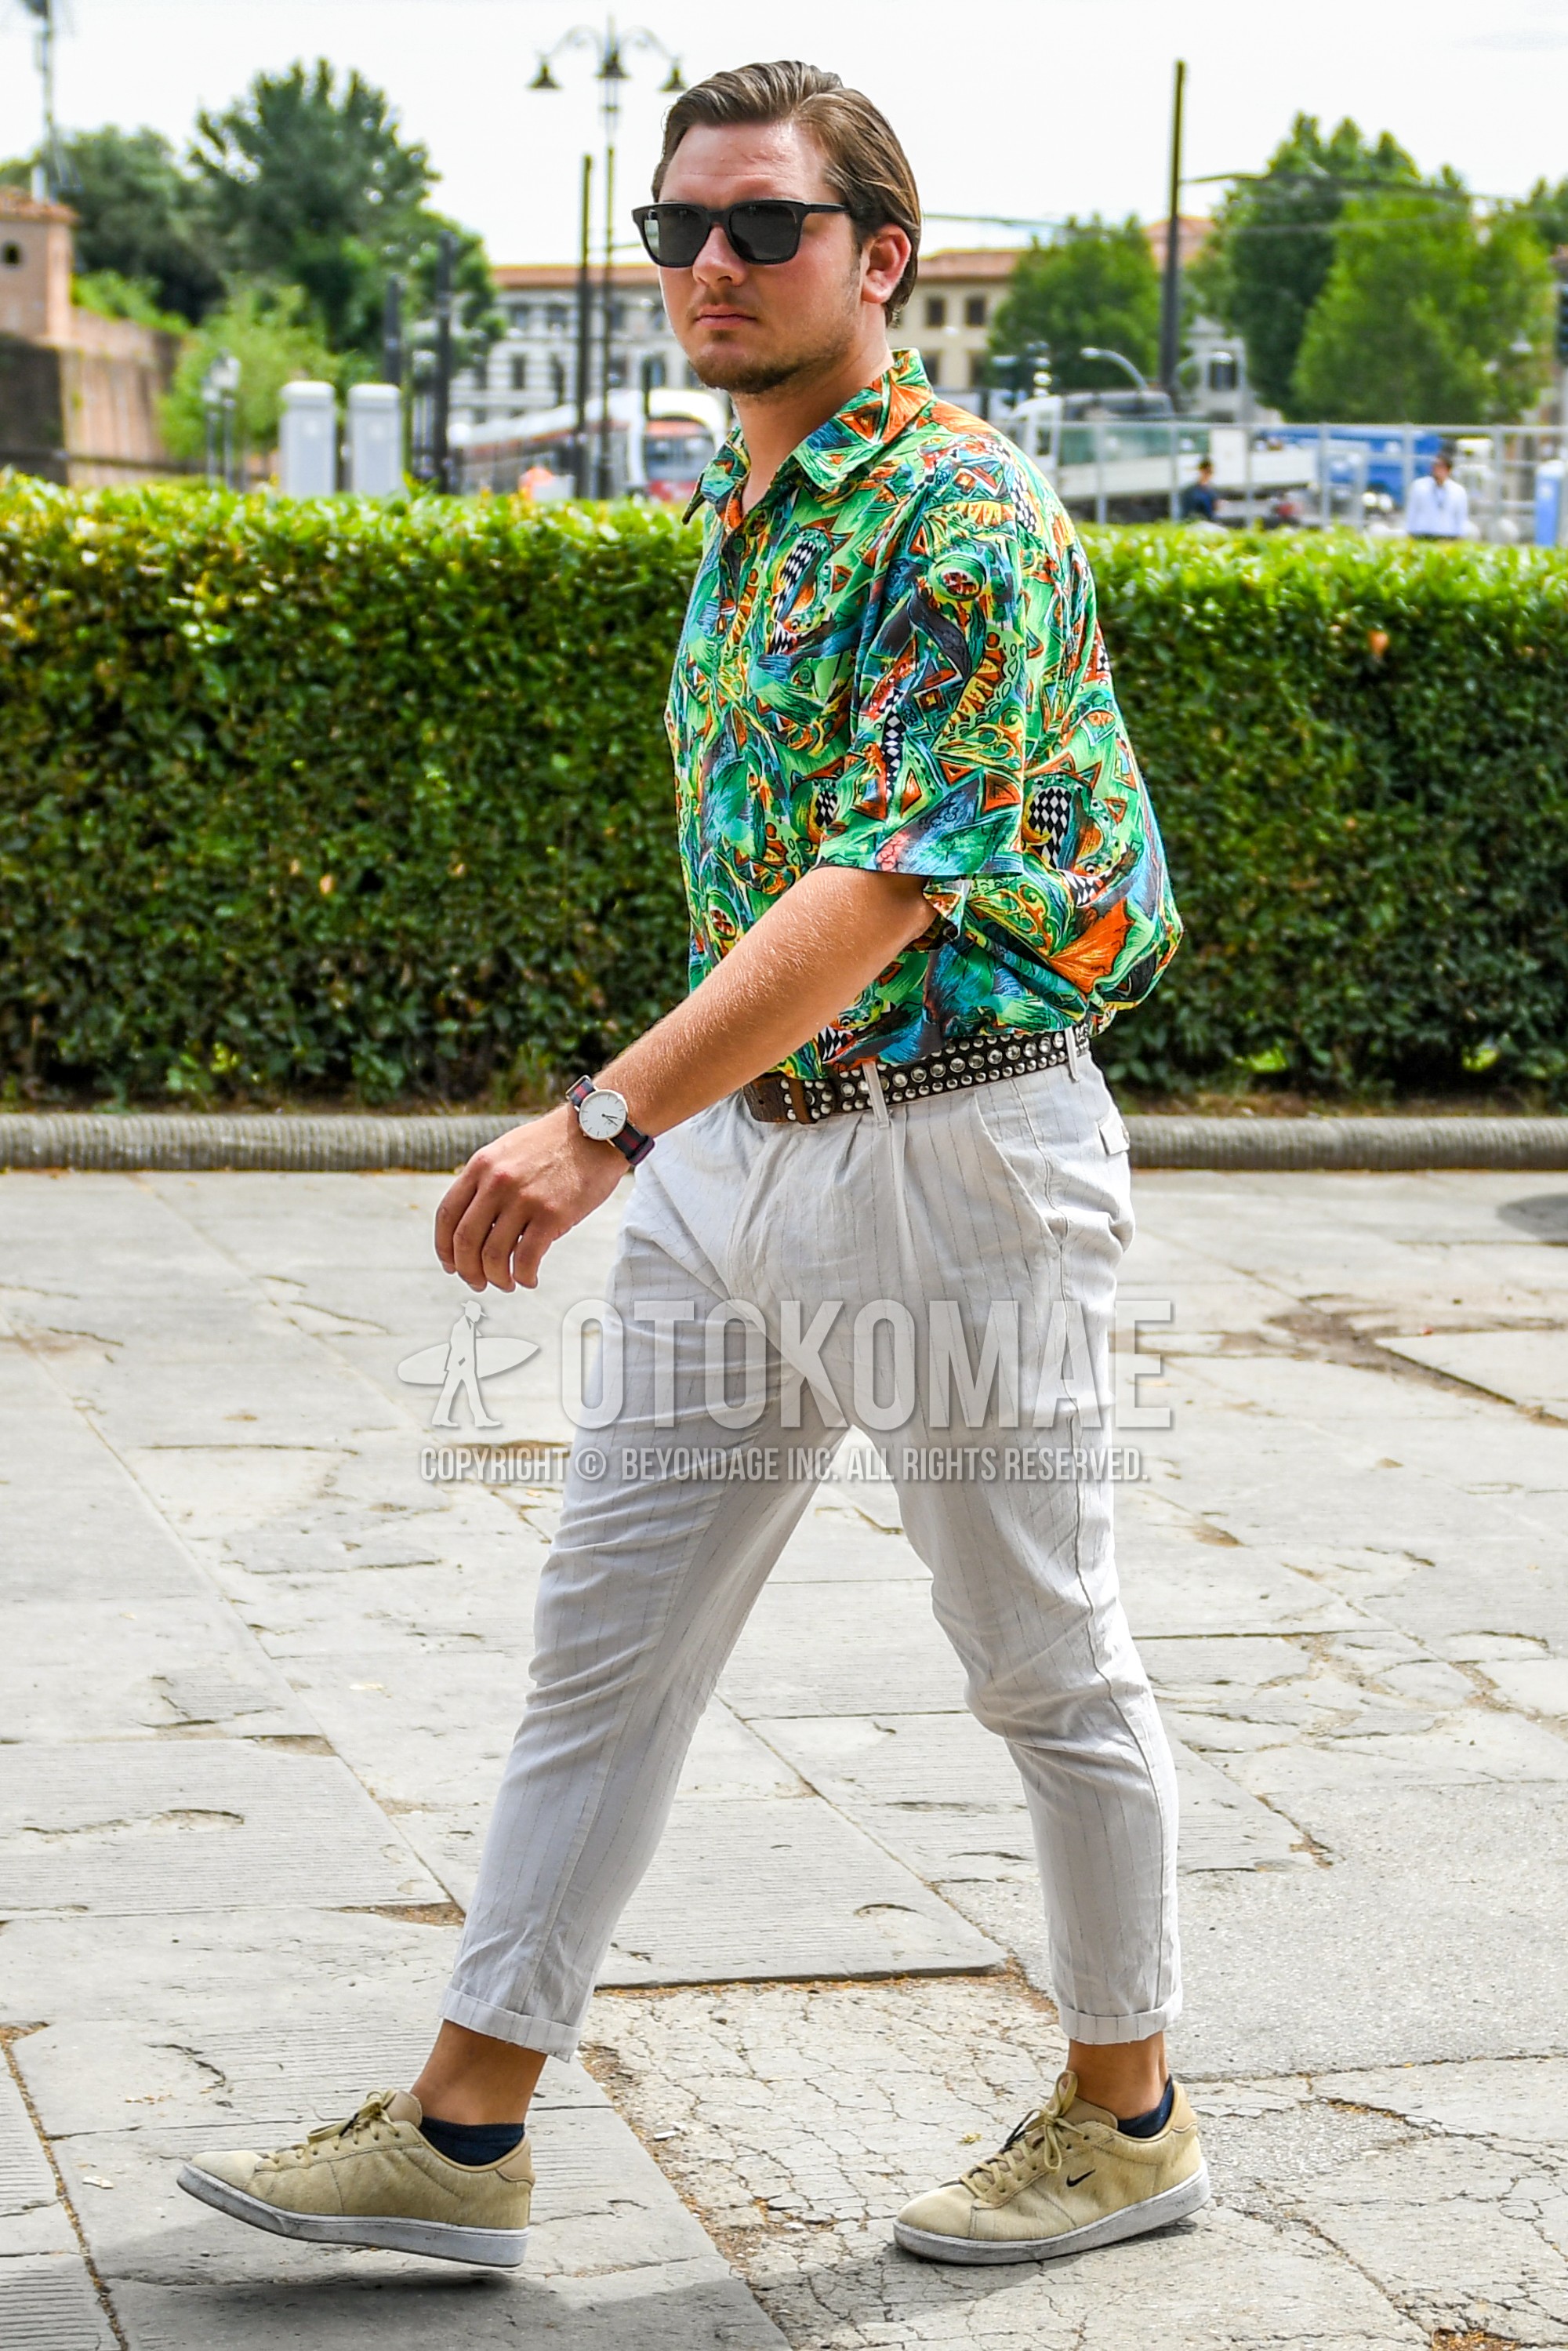 Men's spring summer outfit with black plain sunglasses, green tops/innerwear shirt, brown belt leather belt, white stripes cotton pants, beige low-cut sneakers.